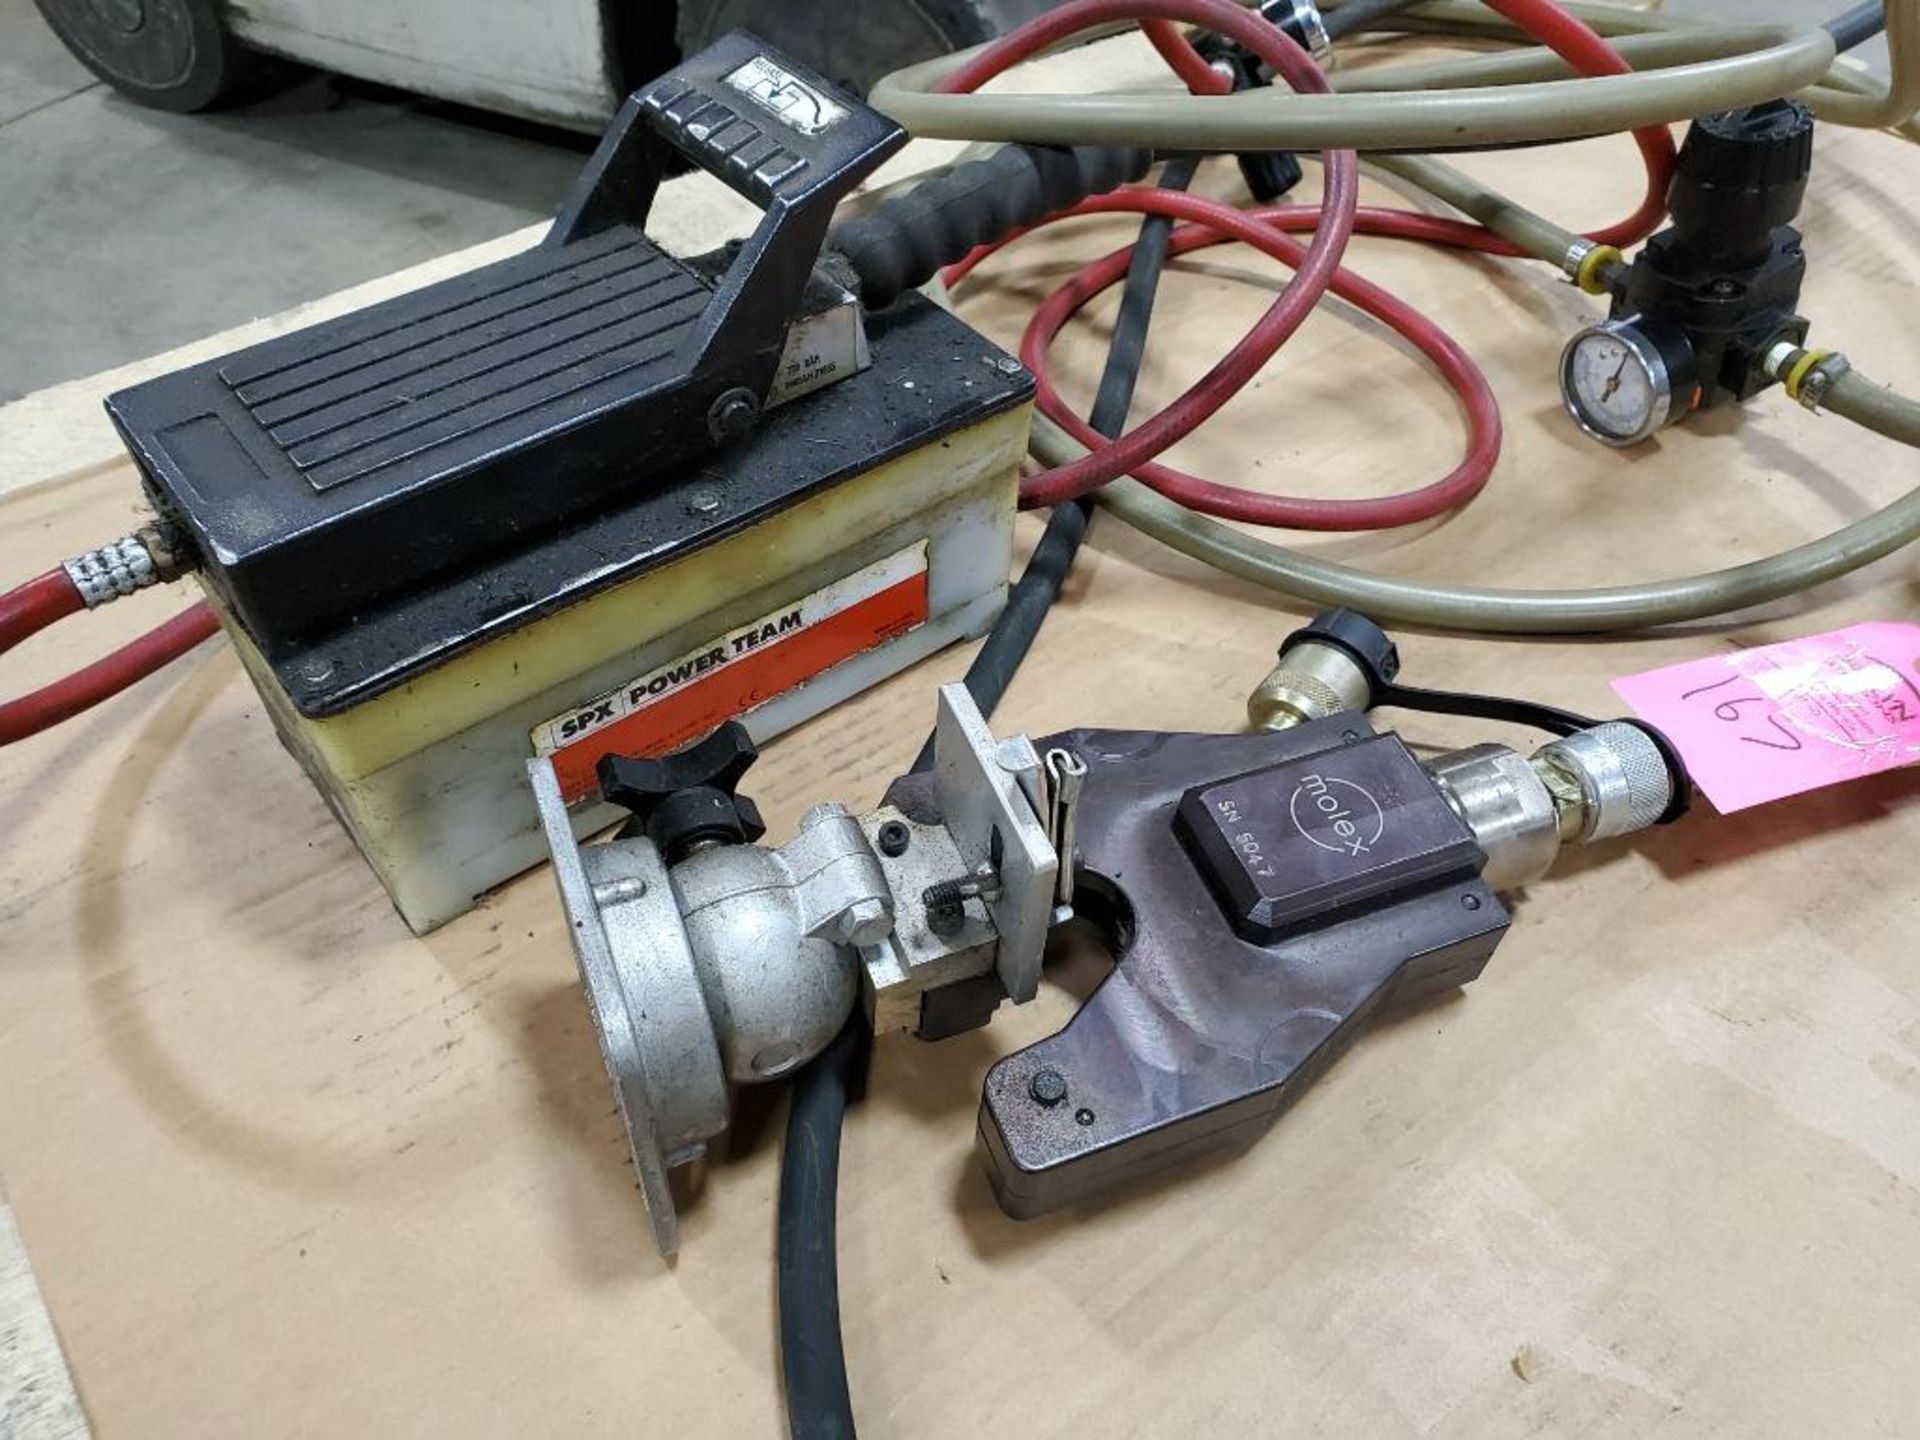 Molex hydraulic crimping unit with bench mount. Includes pneumatic SPX hydraulic power supply.